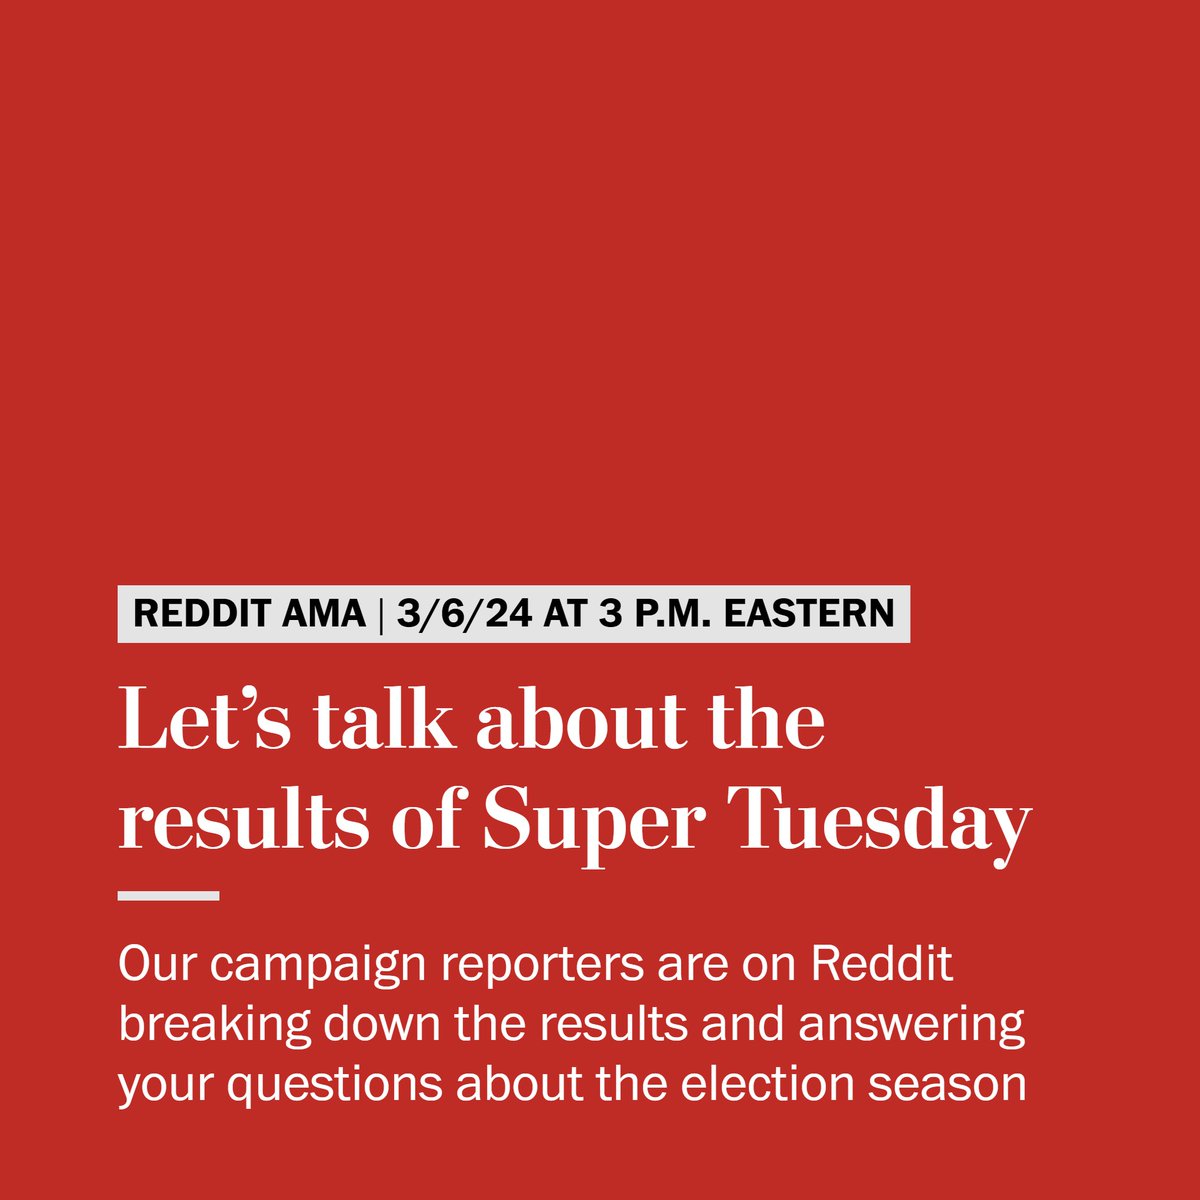 Join Post reporters @Azi, @KnowlesHannah and @marianaa_alfaro on @Reddit as they recap all the happenings from Super Tuesday ahead of President Biden’s highly anticipated State of the Union address on Thursday. We’ll get started at 3 p.m. eastern. Tune in here: